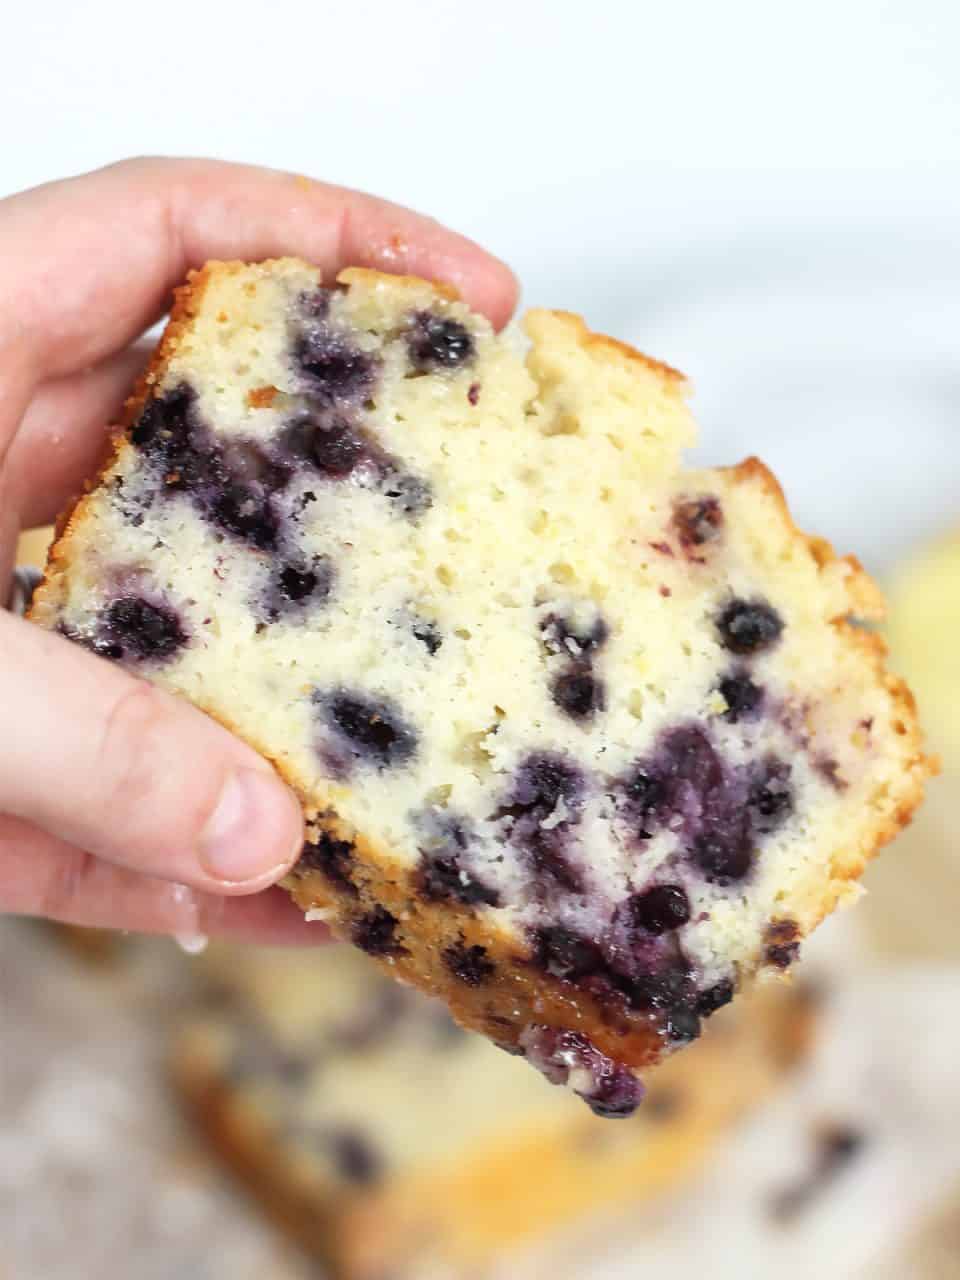 A slice of lemon blueberry pound cake being held.